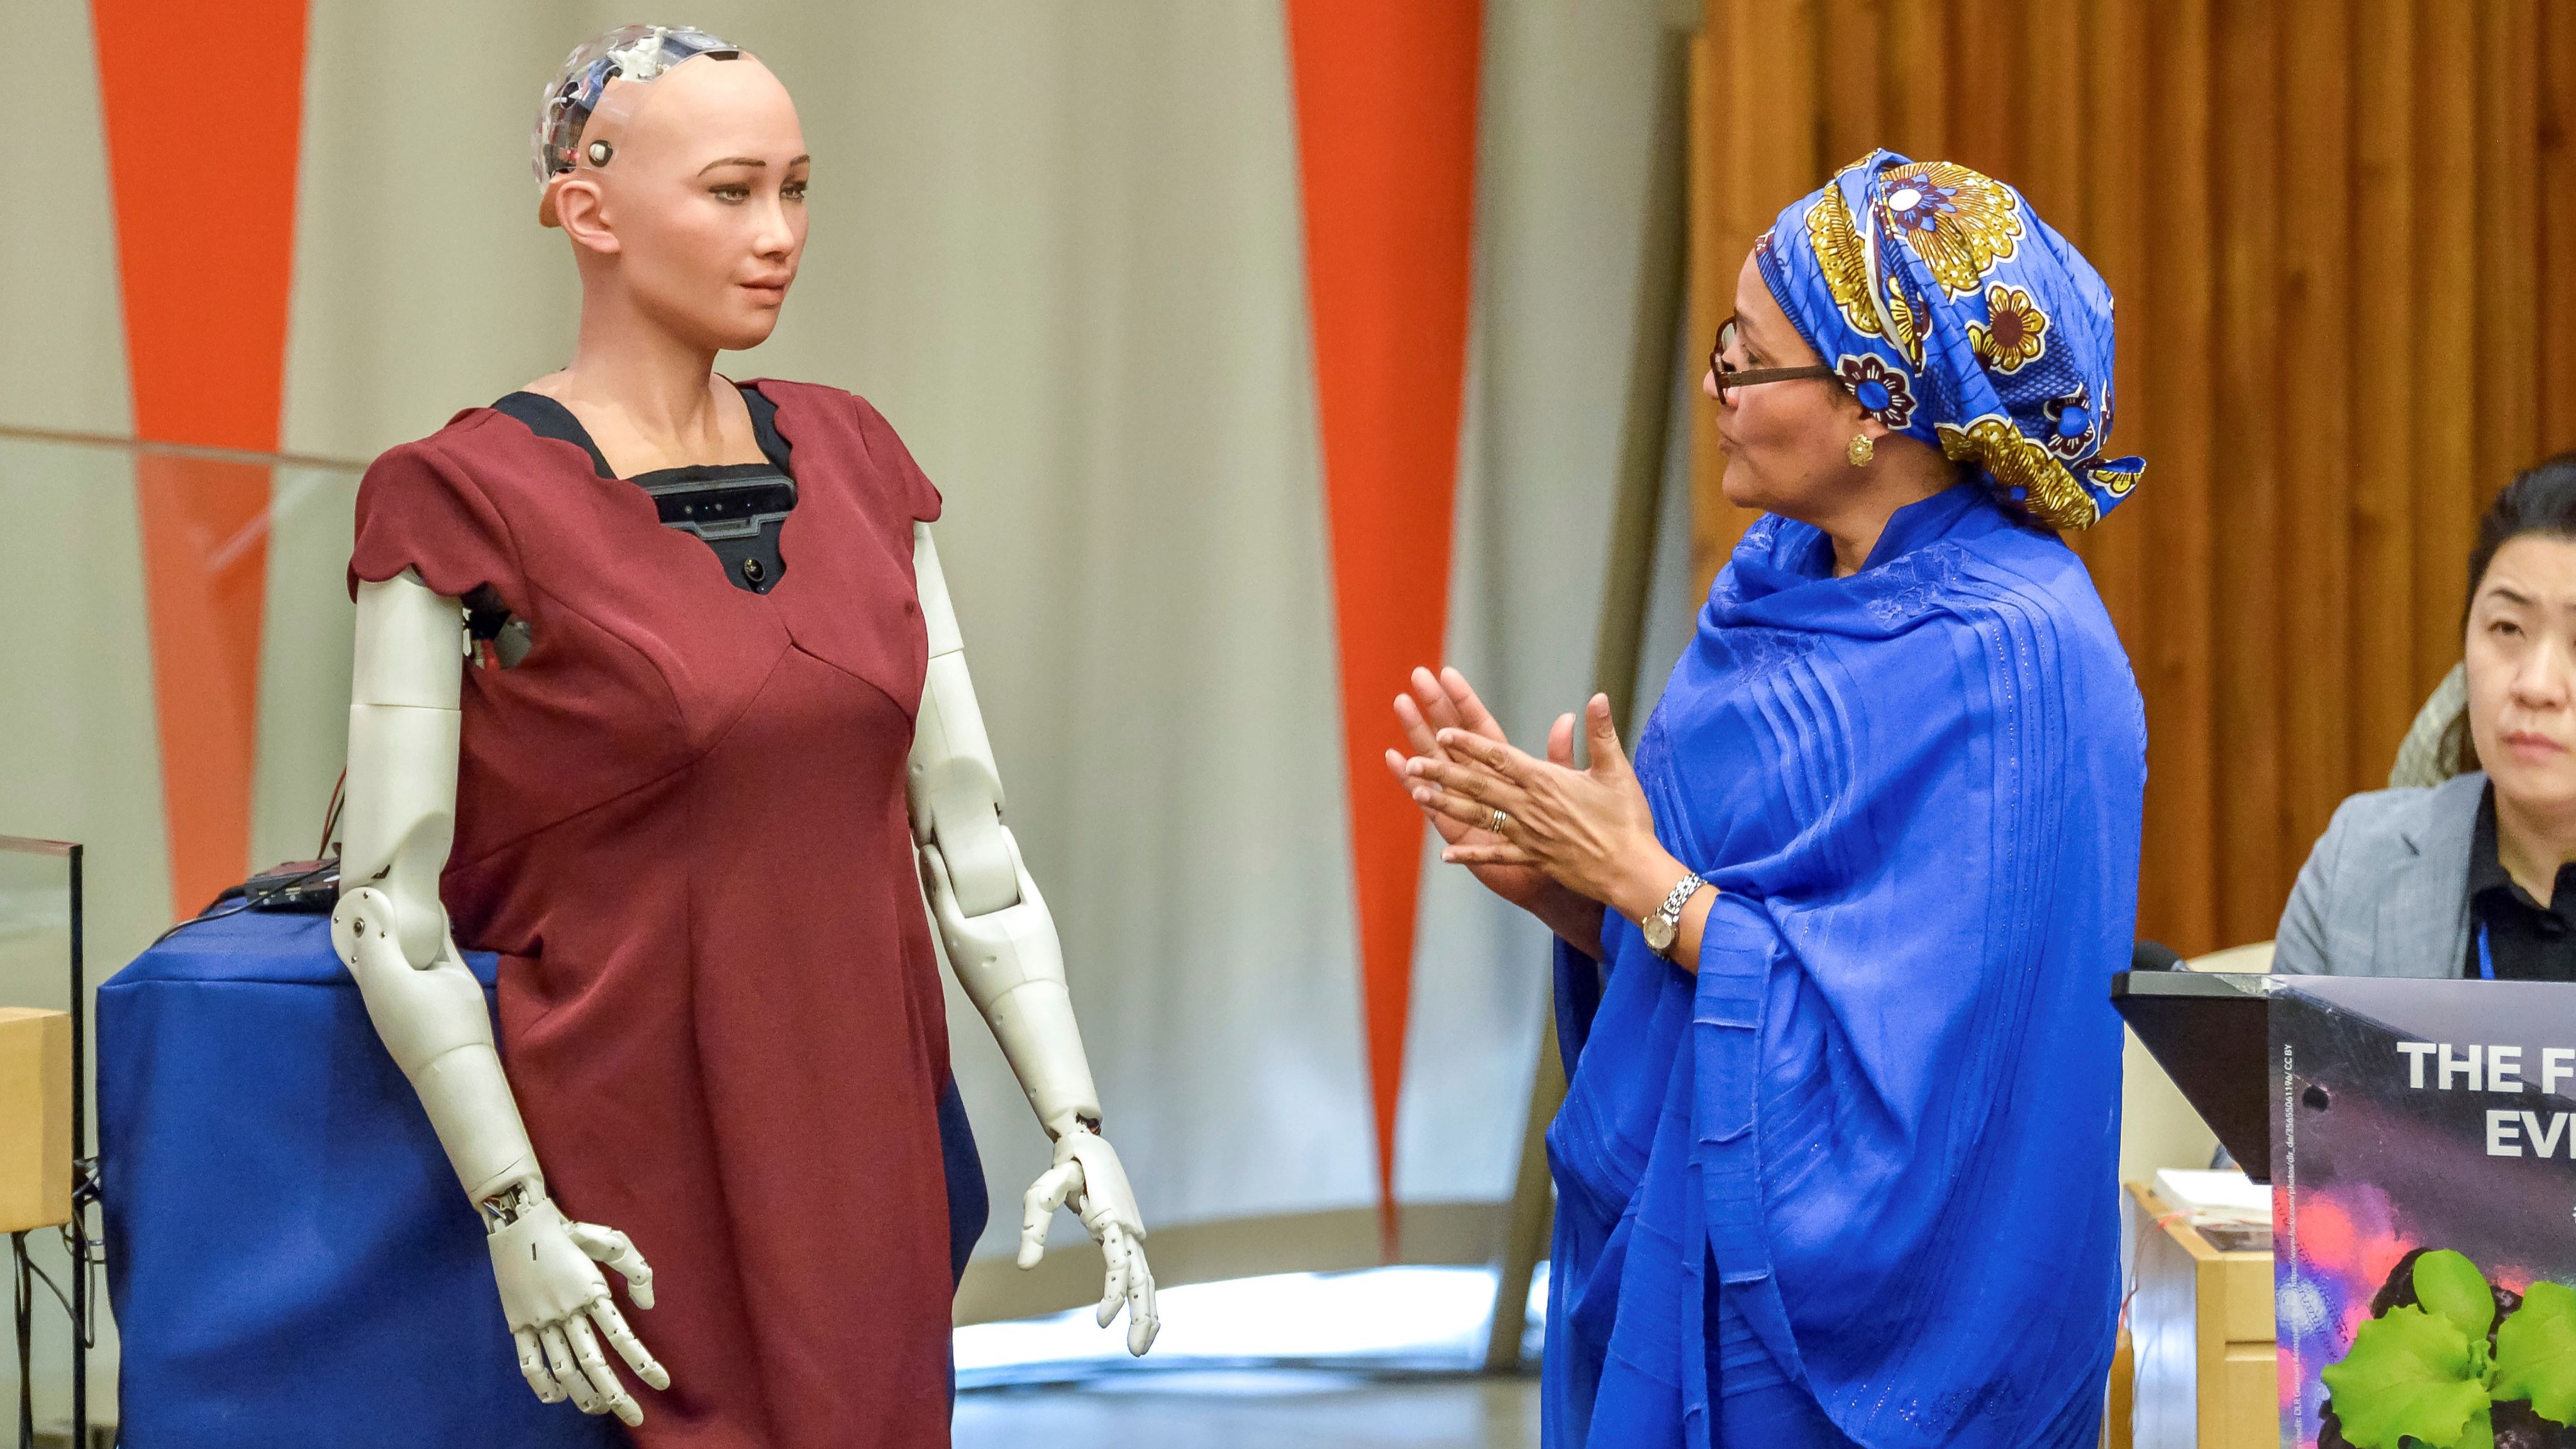 Africa and AI: Artificial Intelligence as Development | WPR